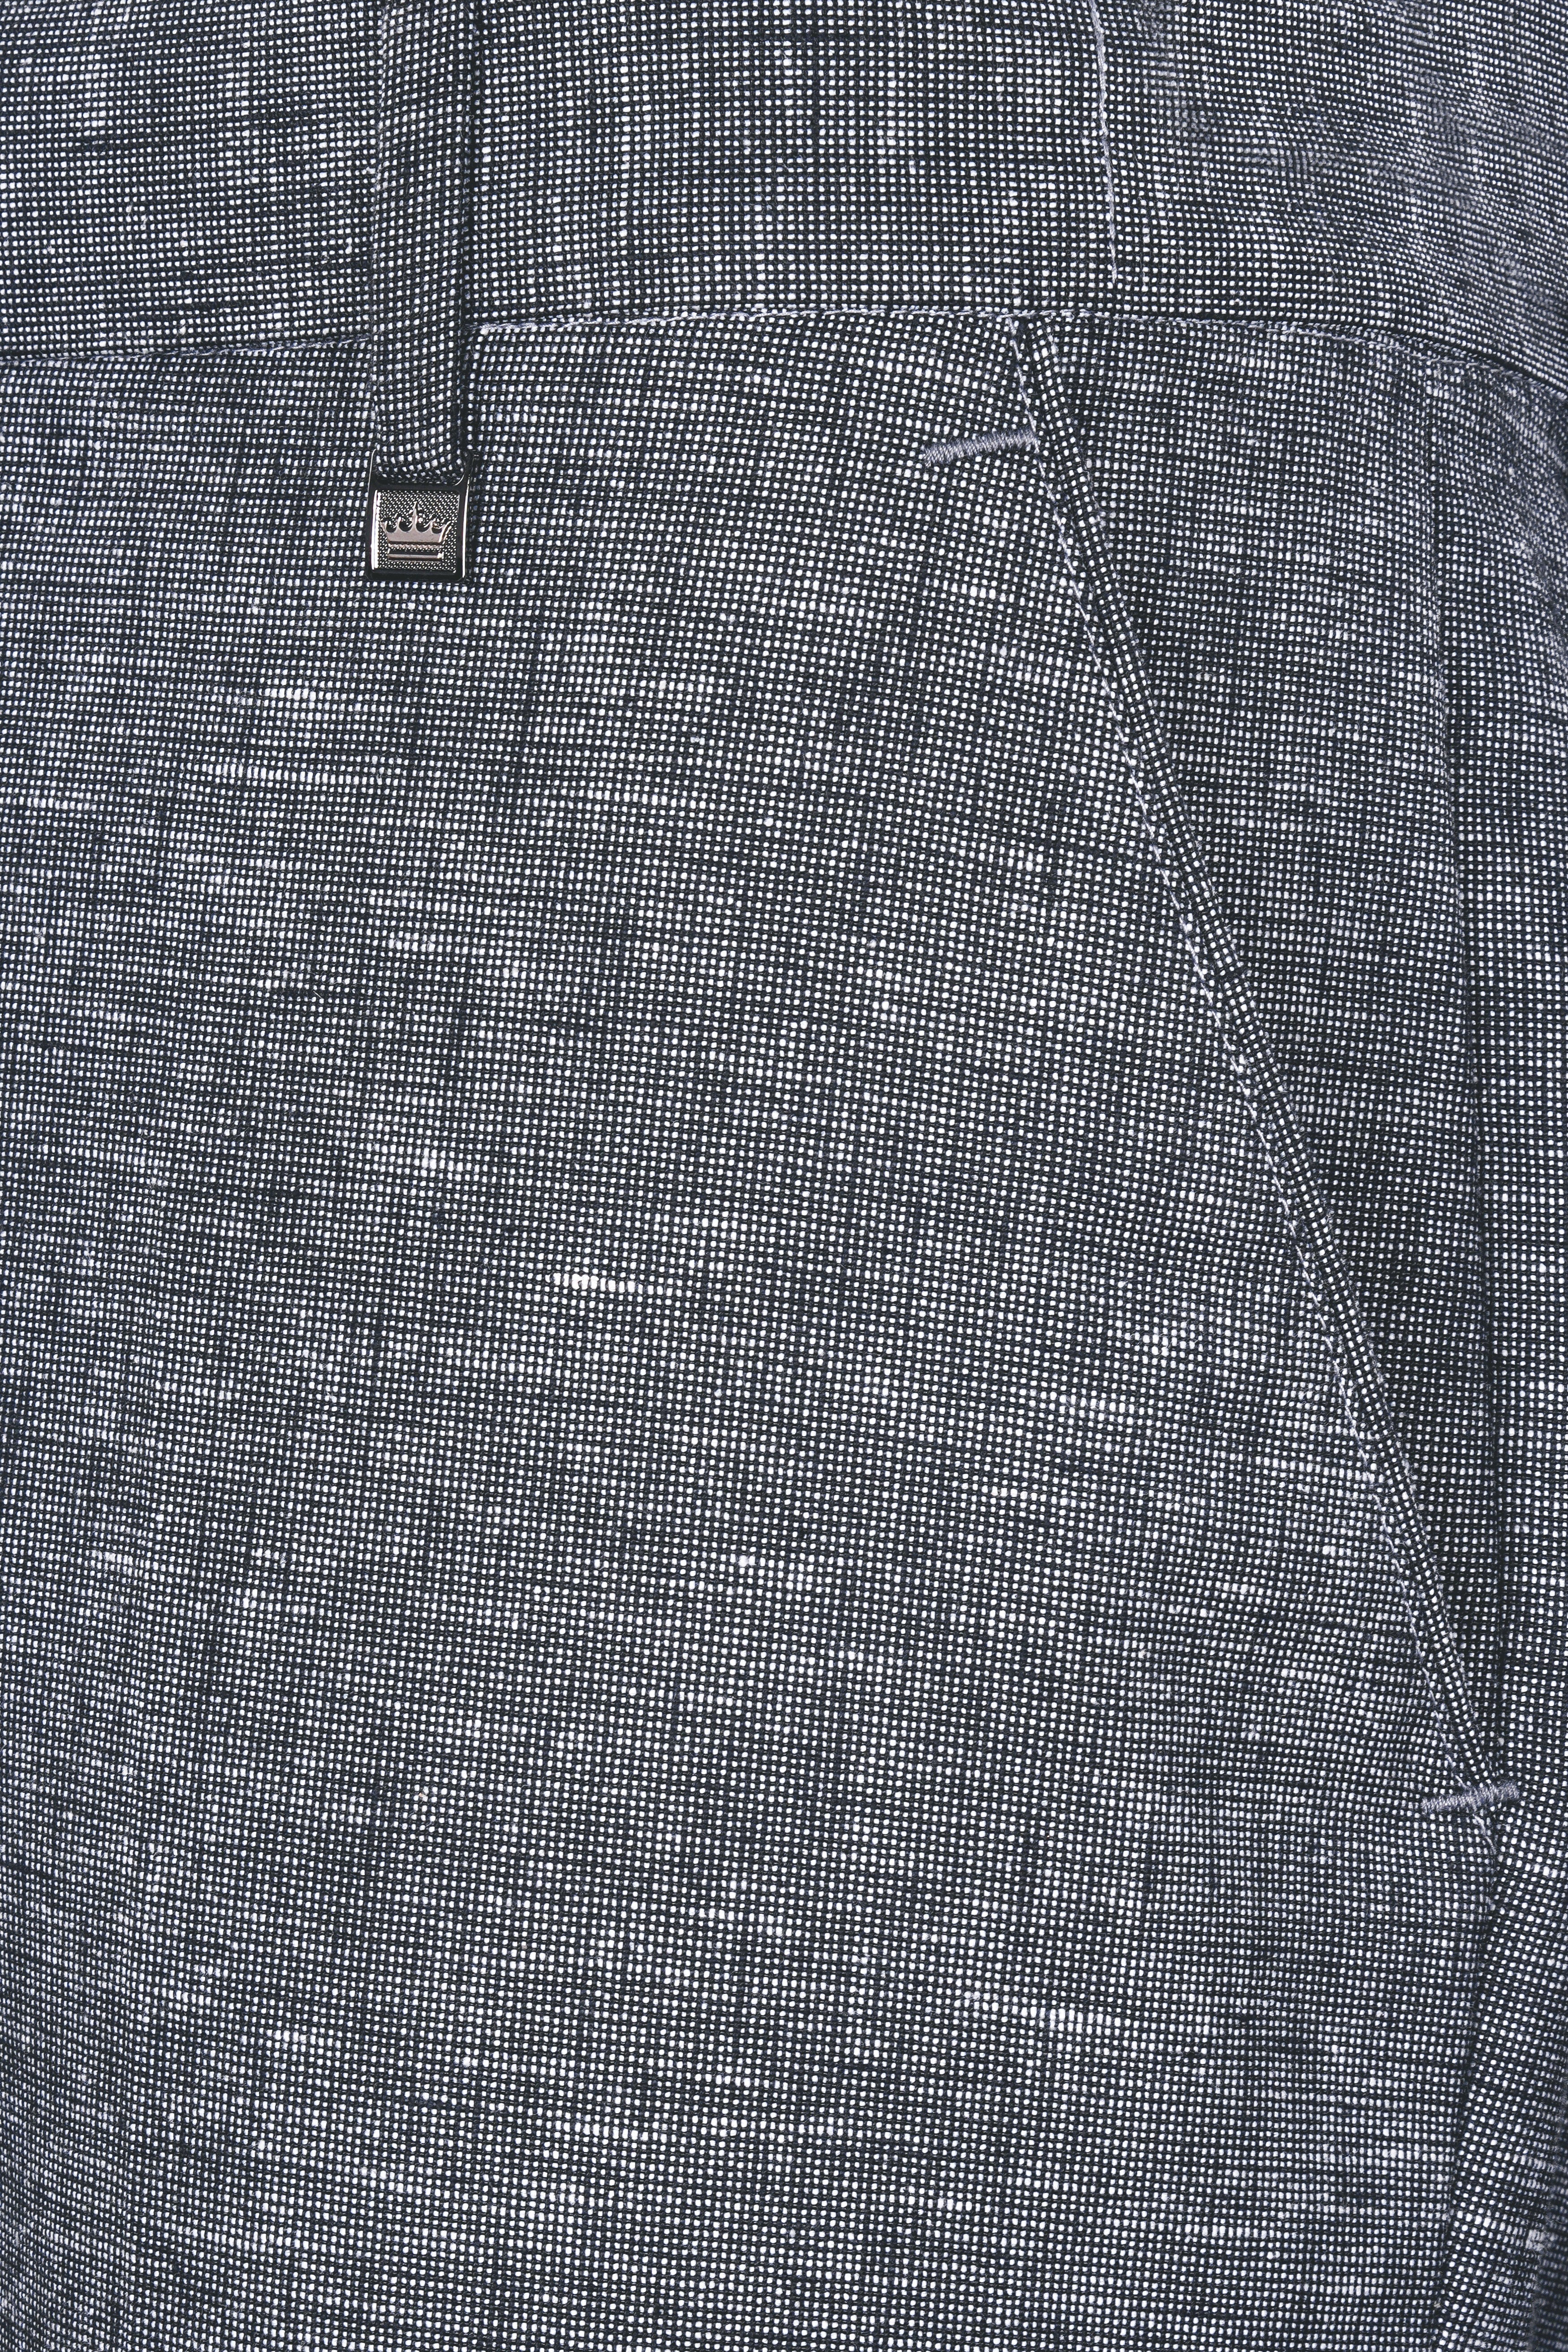 Cloudy Gray Luxurious Linen Bandhgala Suit ST2955-BG-36, ST2955-BG-38, ST2955-BG-40, ST2955-BG-42, ST2955-BG-44, ST2955-BG-46, ST2955-BG-48, ST2955-BG-50, ST2955-BG-52, ST2955-BG-54, ST2955-BG-56, ST2955-BG-58, ST2955-BG-60